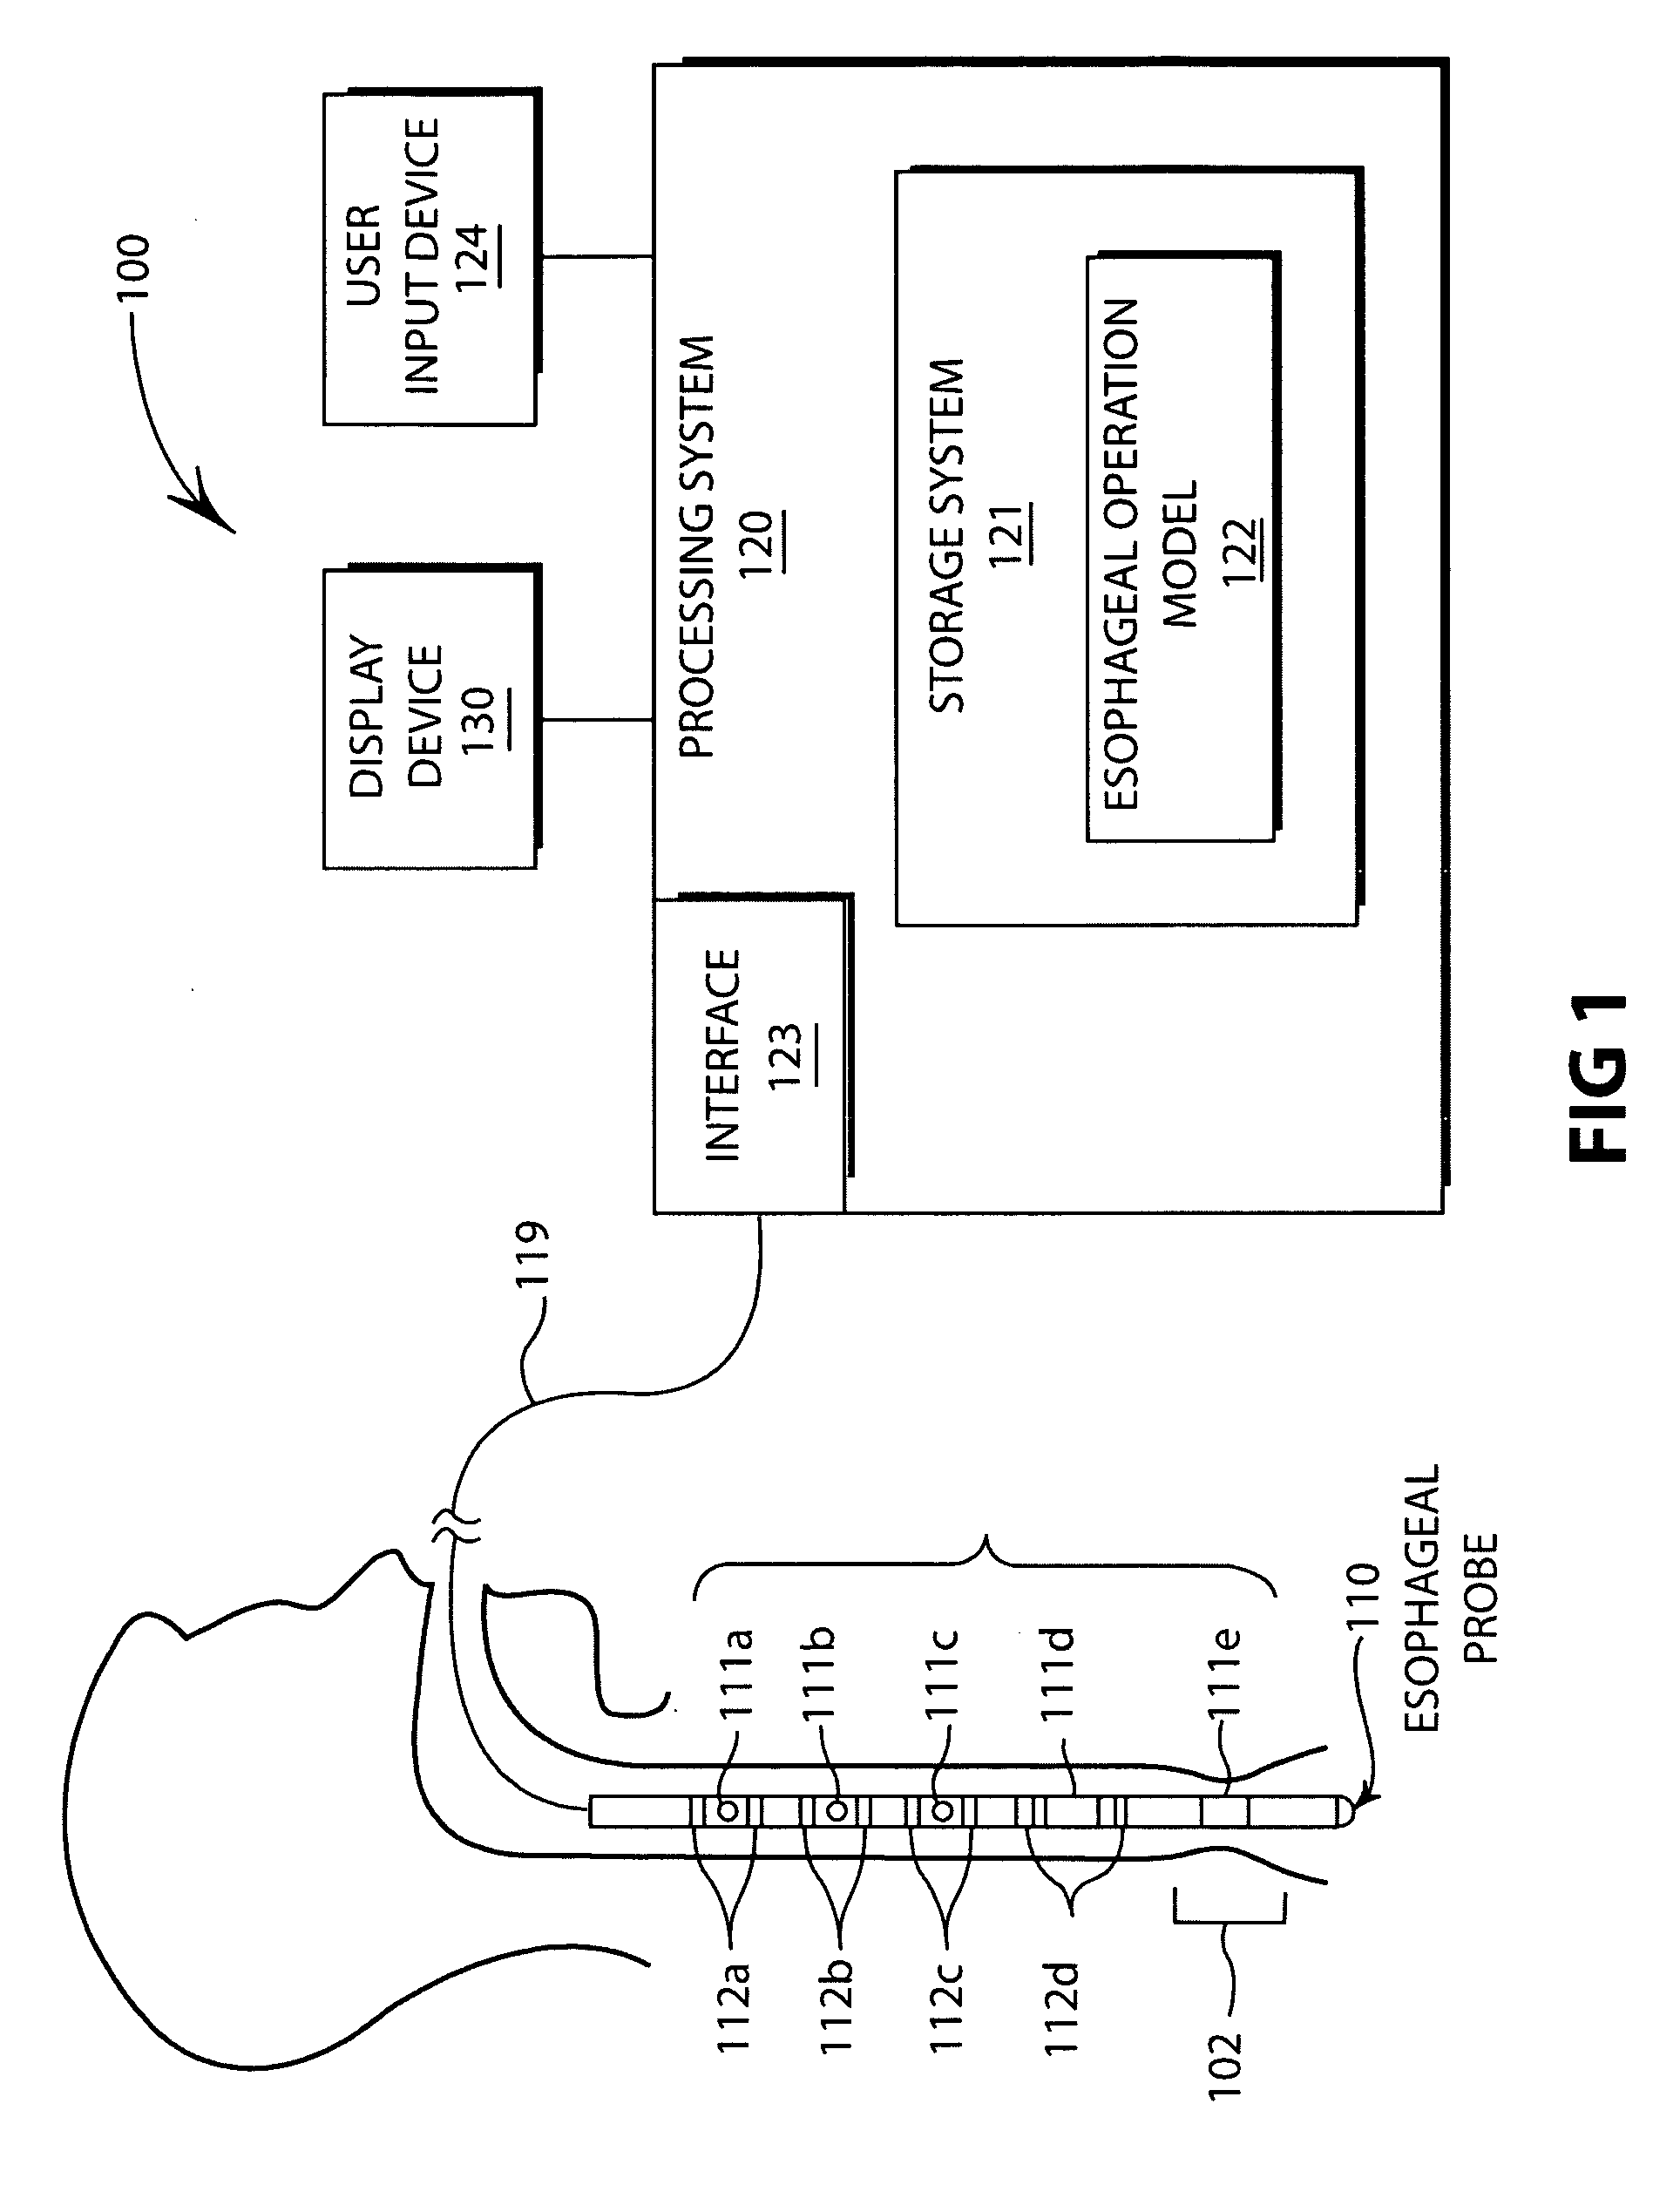 Esophageal function display and playback system and method for displaying esophageal function